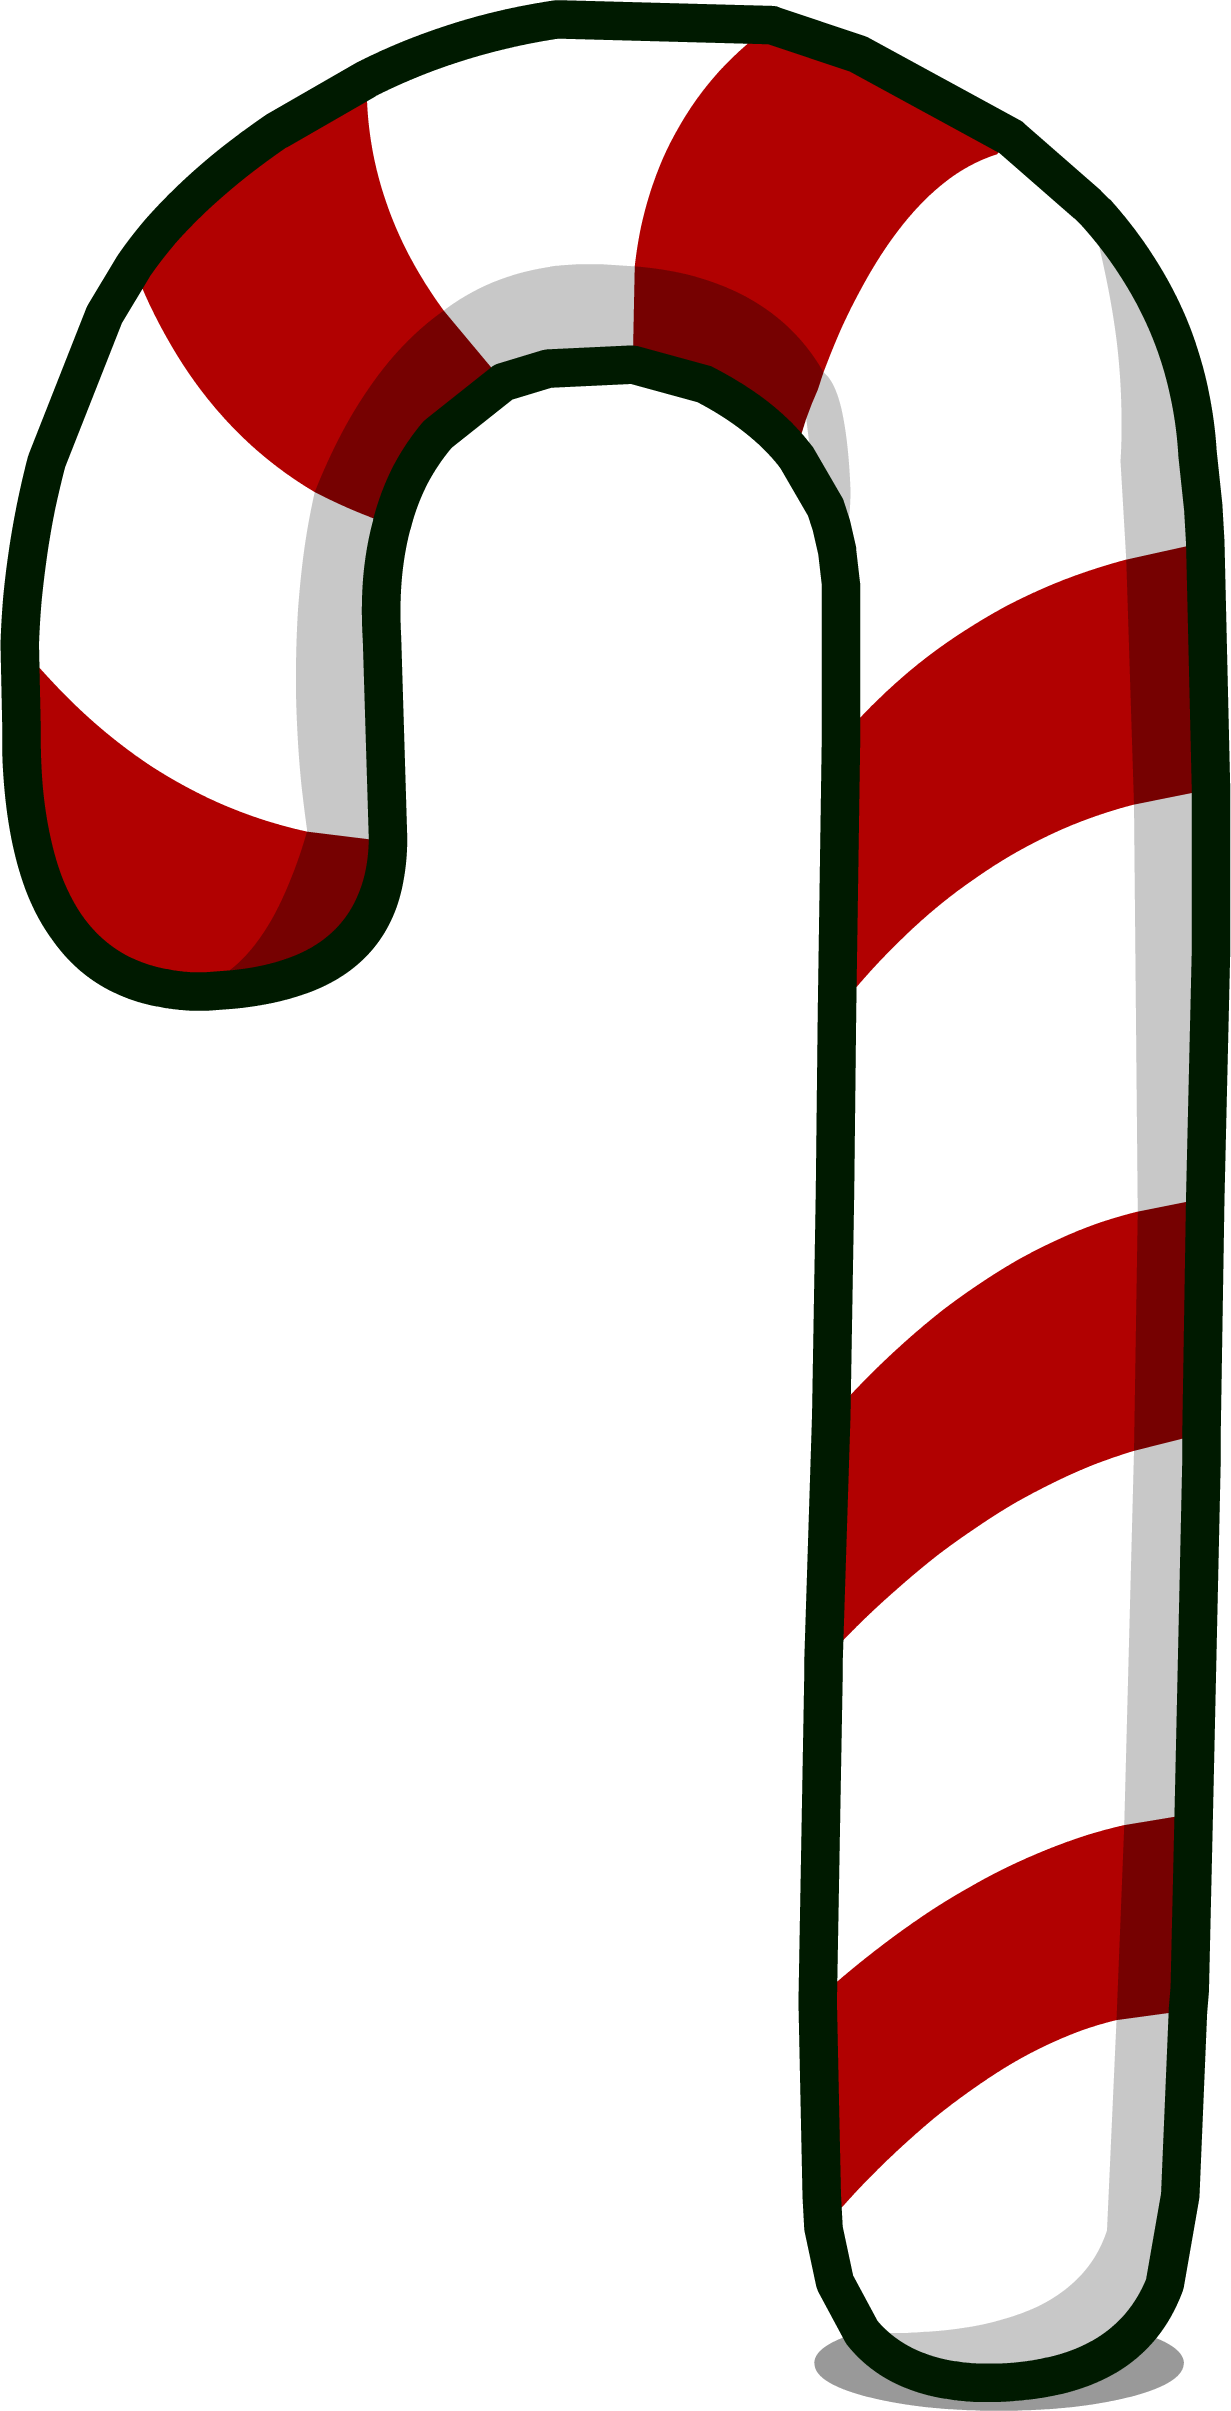 Candy Cane Baixar PNG Image